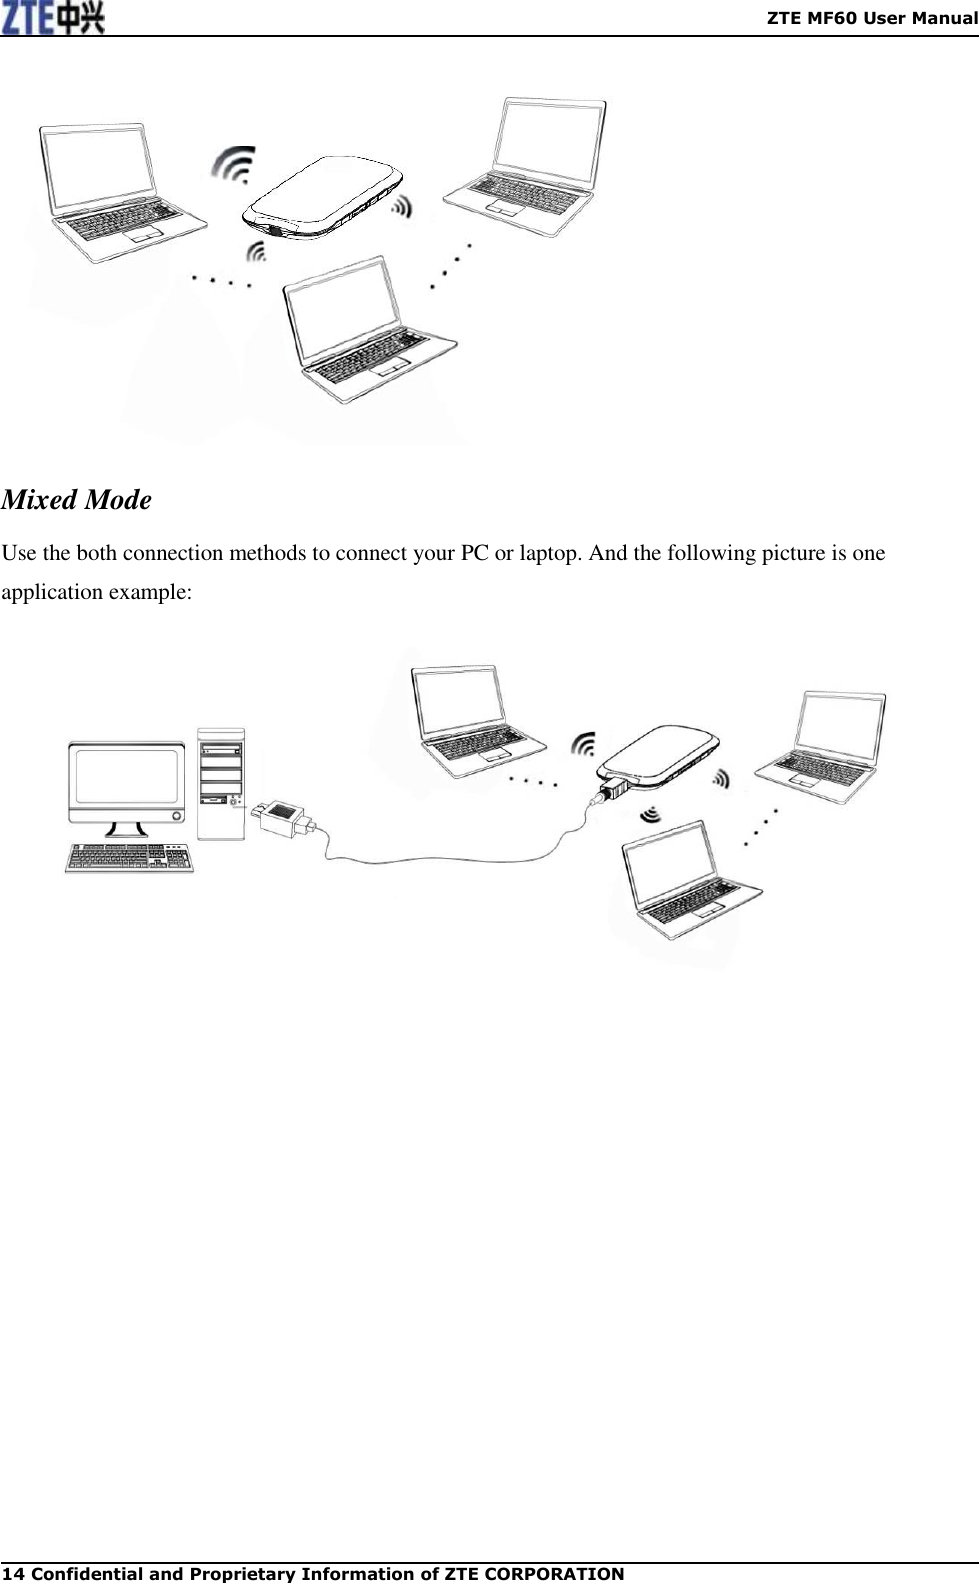    ZTE MF60 User Manual 14 Confidential and Proprietary Information of ZTE CORPORATION  Mixed Mode Use the both connection methods to connect your PC or laptop. And the following picture is one application example:  